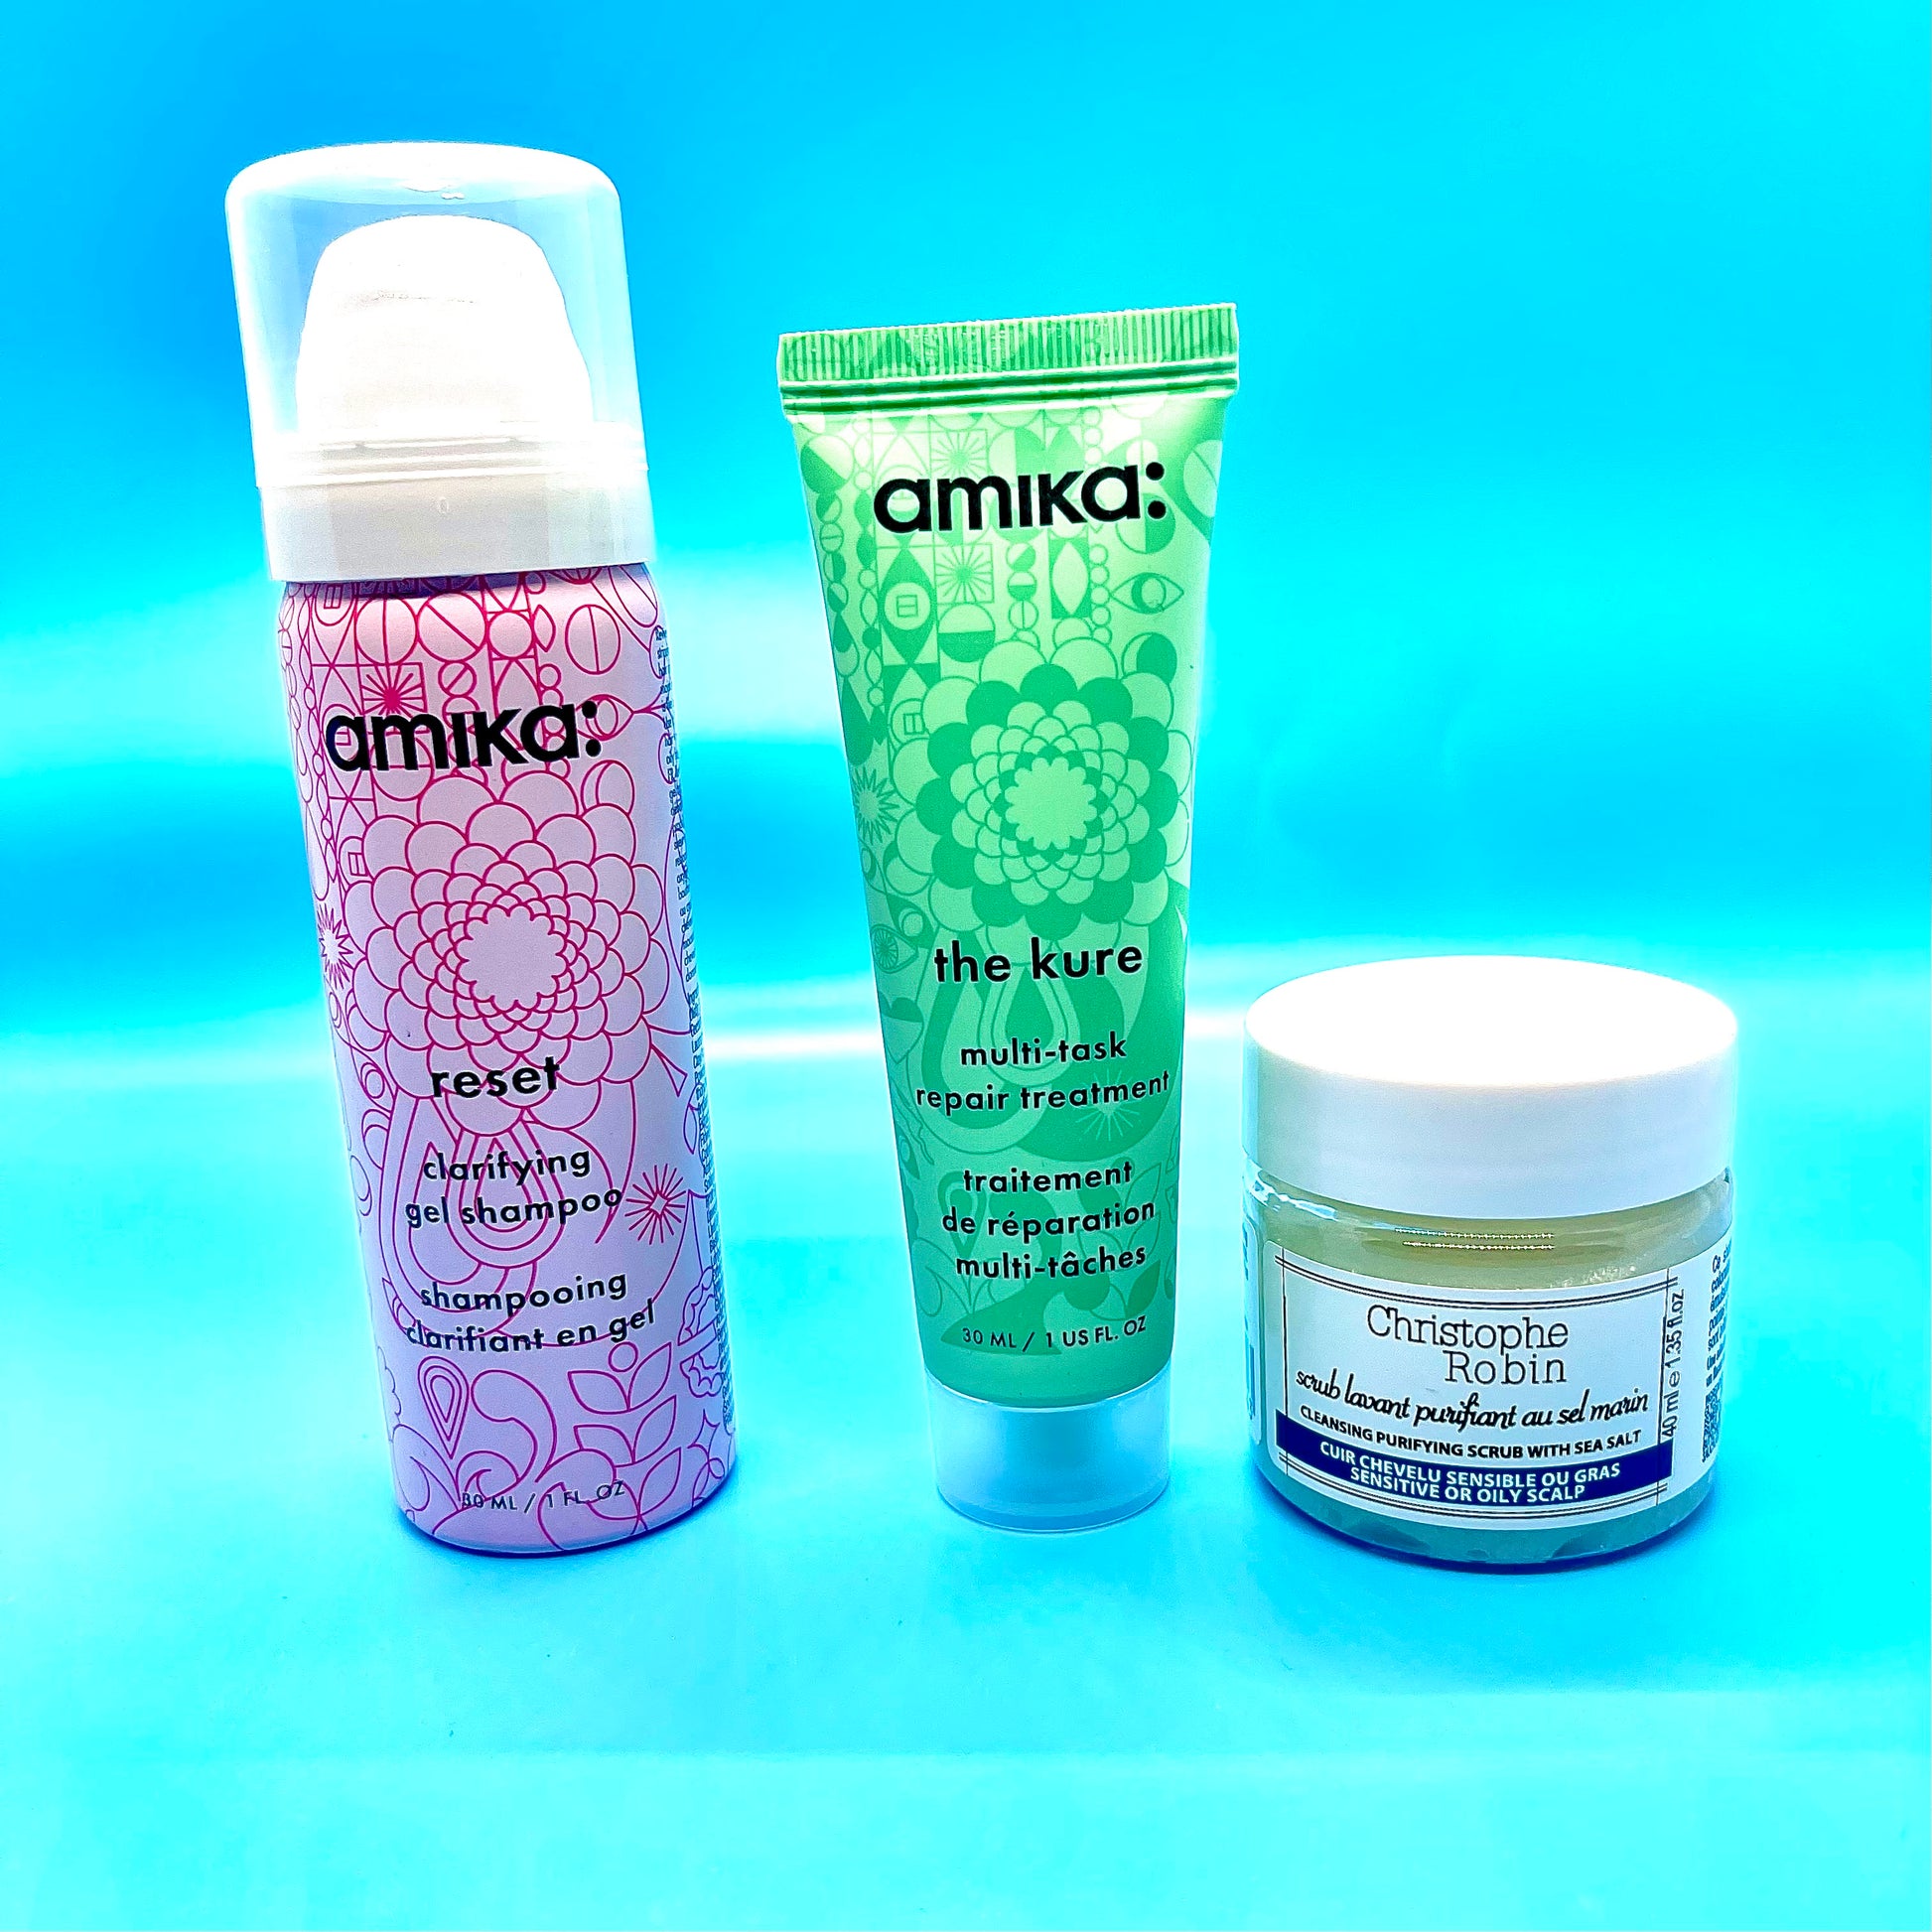 Amika Reset Gel Shampoo Will Attract dirt like a magnet to draw out impurities + remove product buildup, without stripping. Get The Kure Treatment from Amika and get your hair laid without Frizz, Flyaways & Restore healthy hair while repairing split end for all hair types. The Christophe Robin Cleansing Purifying Scrub with Sea Salt will eradicate stubborn build up left behind that shampoo just cant remove